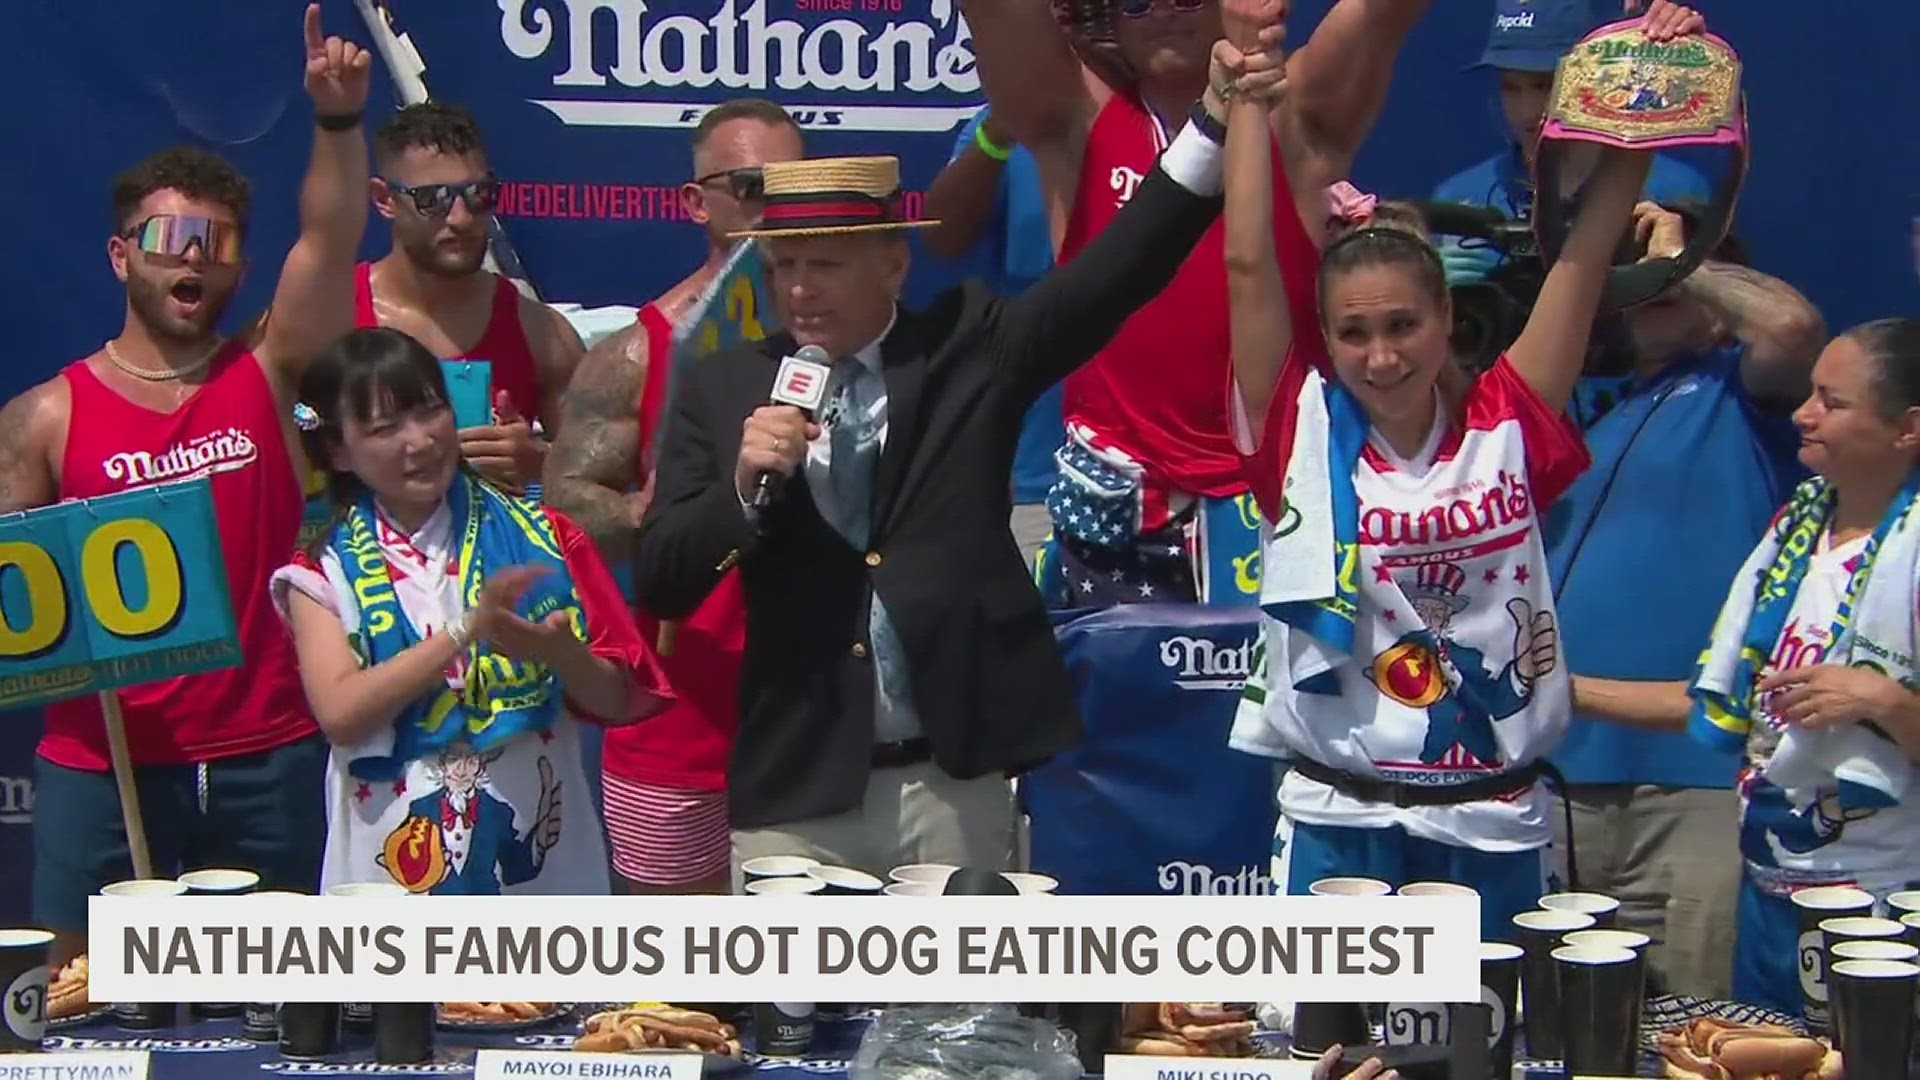 Nathan's Famous Hot Dog Contest names this year's winners